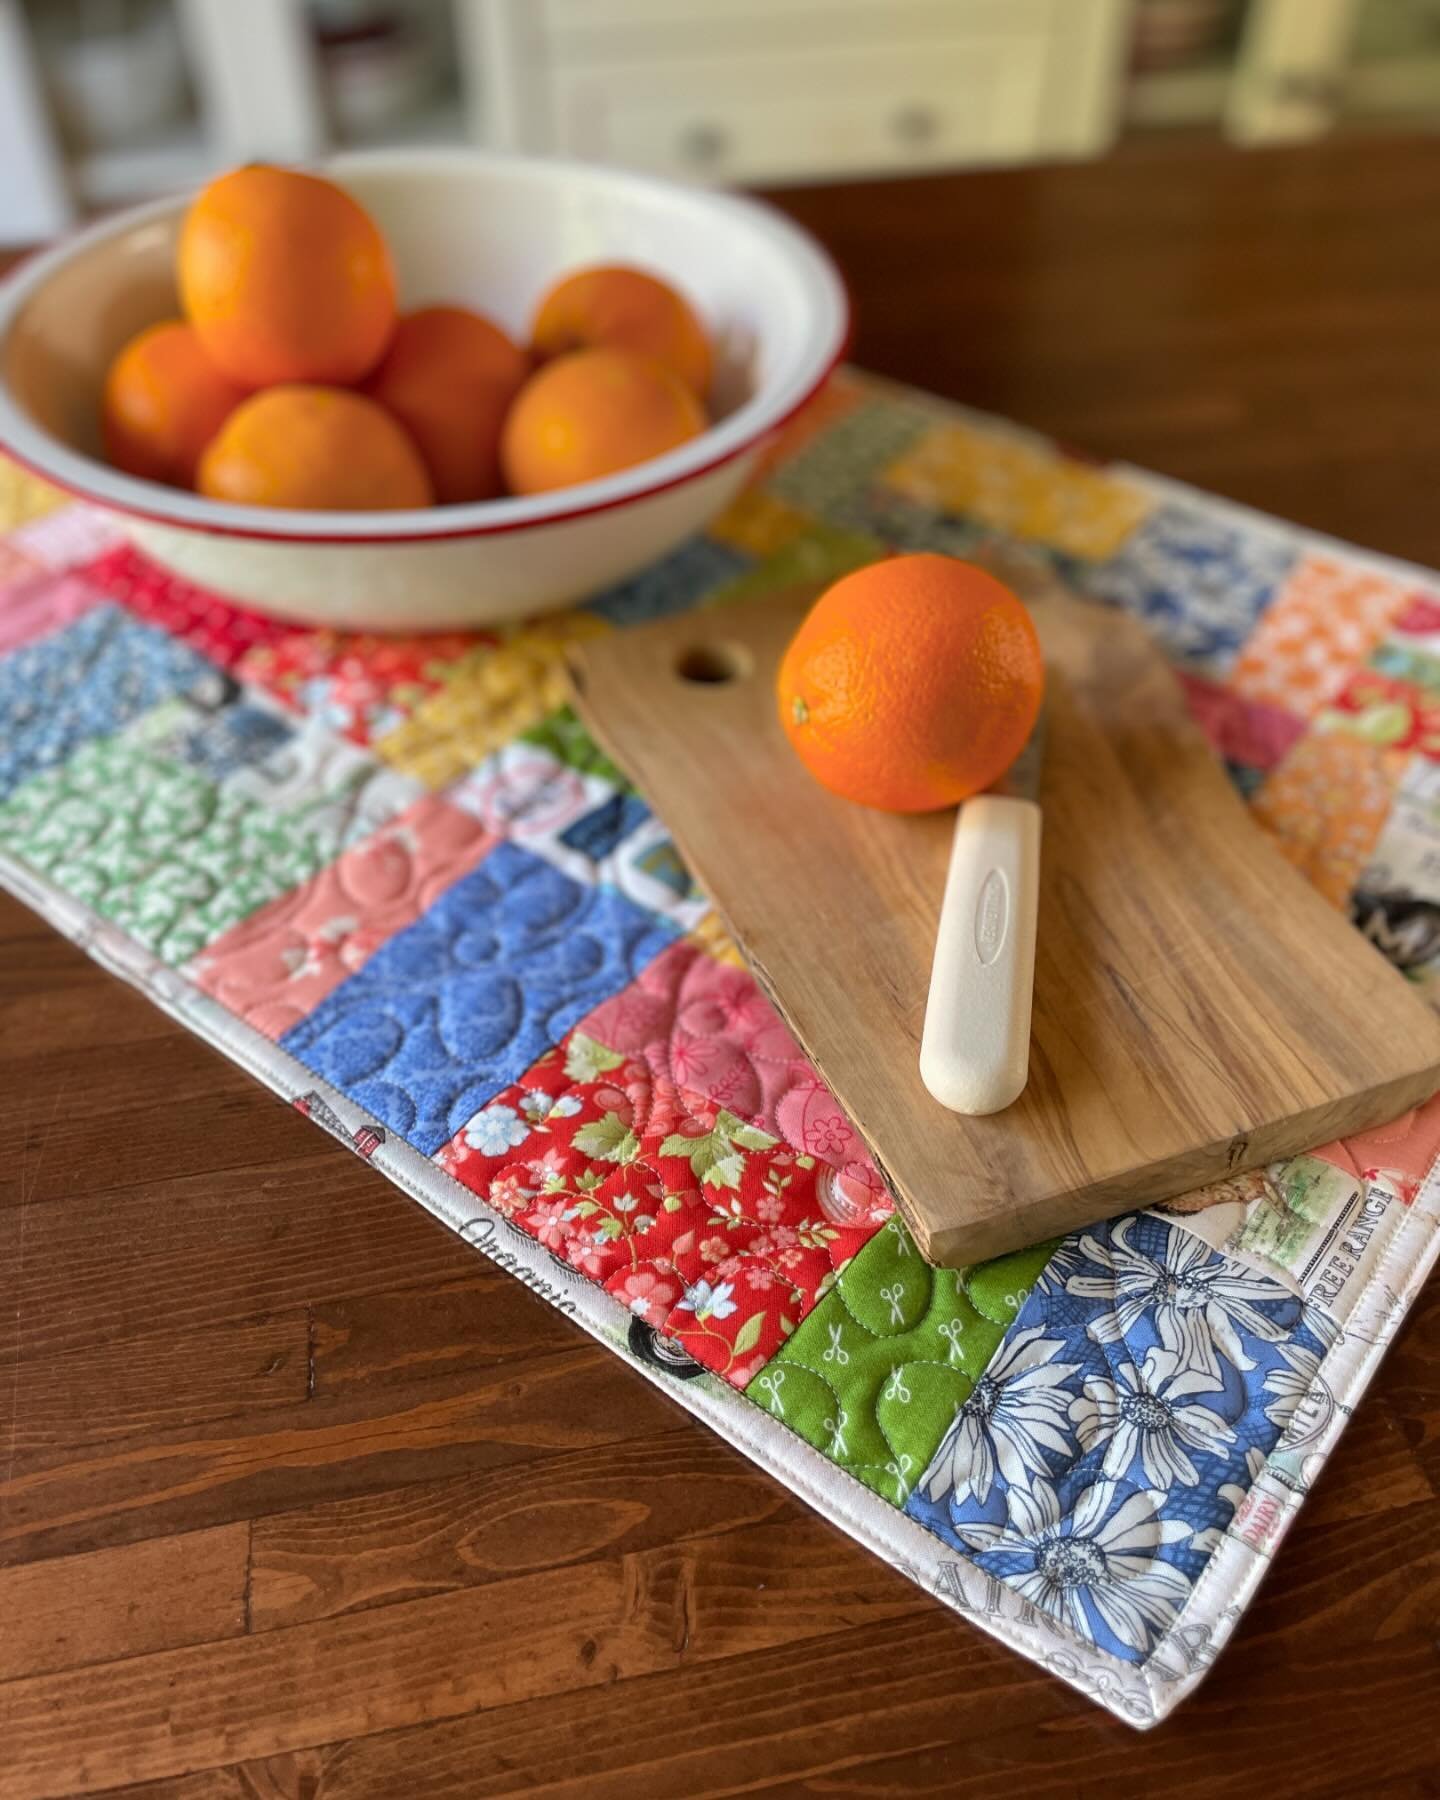 🌸🍊🌱🌺☀️
I love making table runners! 

Especially when I&rsquo;ve got a lot on my schedule but still want to quilt. 

They&rsquo;re usually quick to make and easy to finish. And I love that about them. 

I&rsquo;m running a 🌸SPRING SPECIAL🌸! 

D